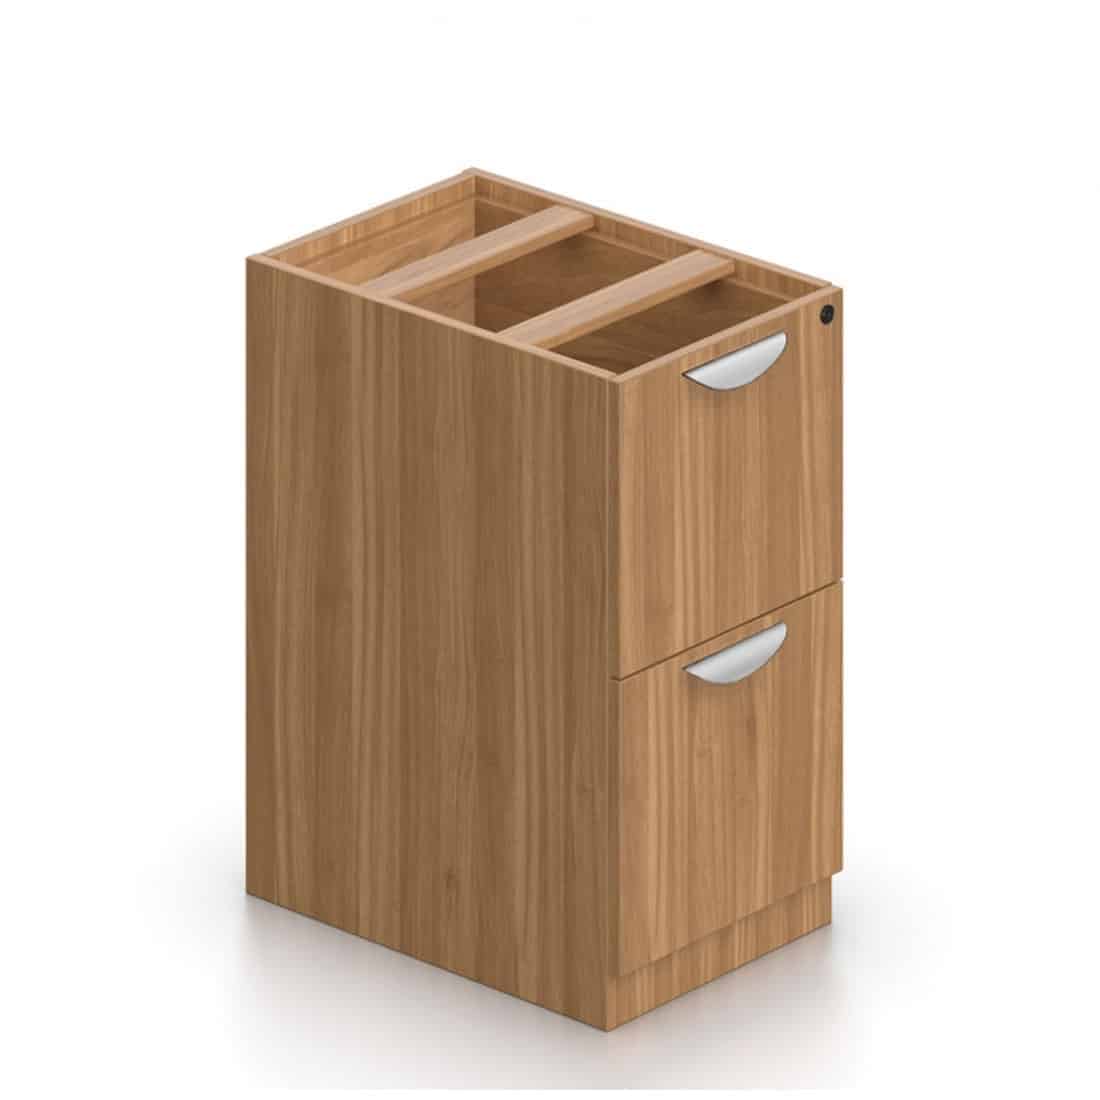 Box/File mobile pedestal with cushion top Padded mobile file pedestal